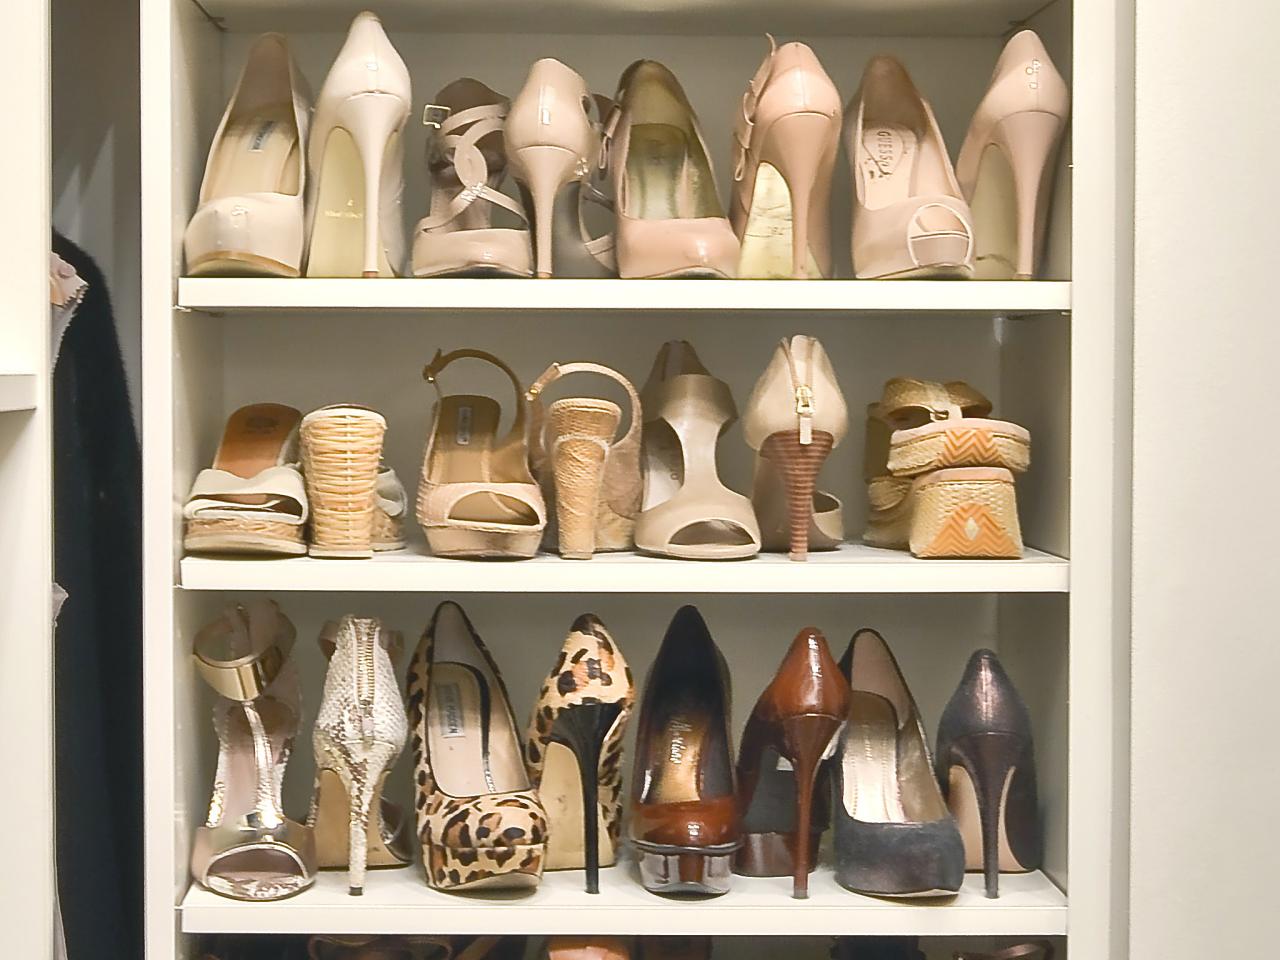 Having a shoe rack will keep your shoes organized and you can easily see which you will wear.